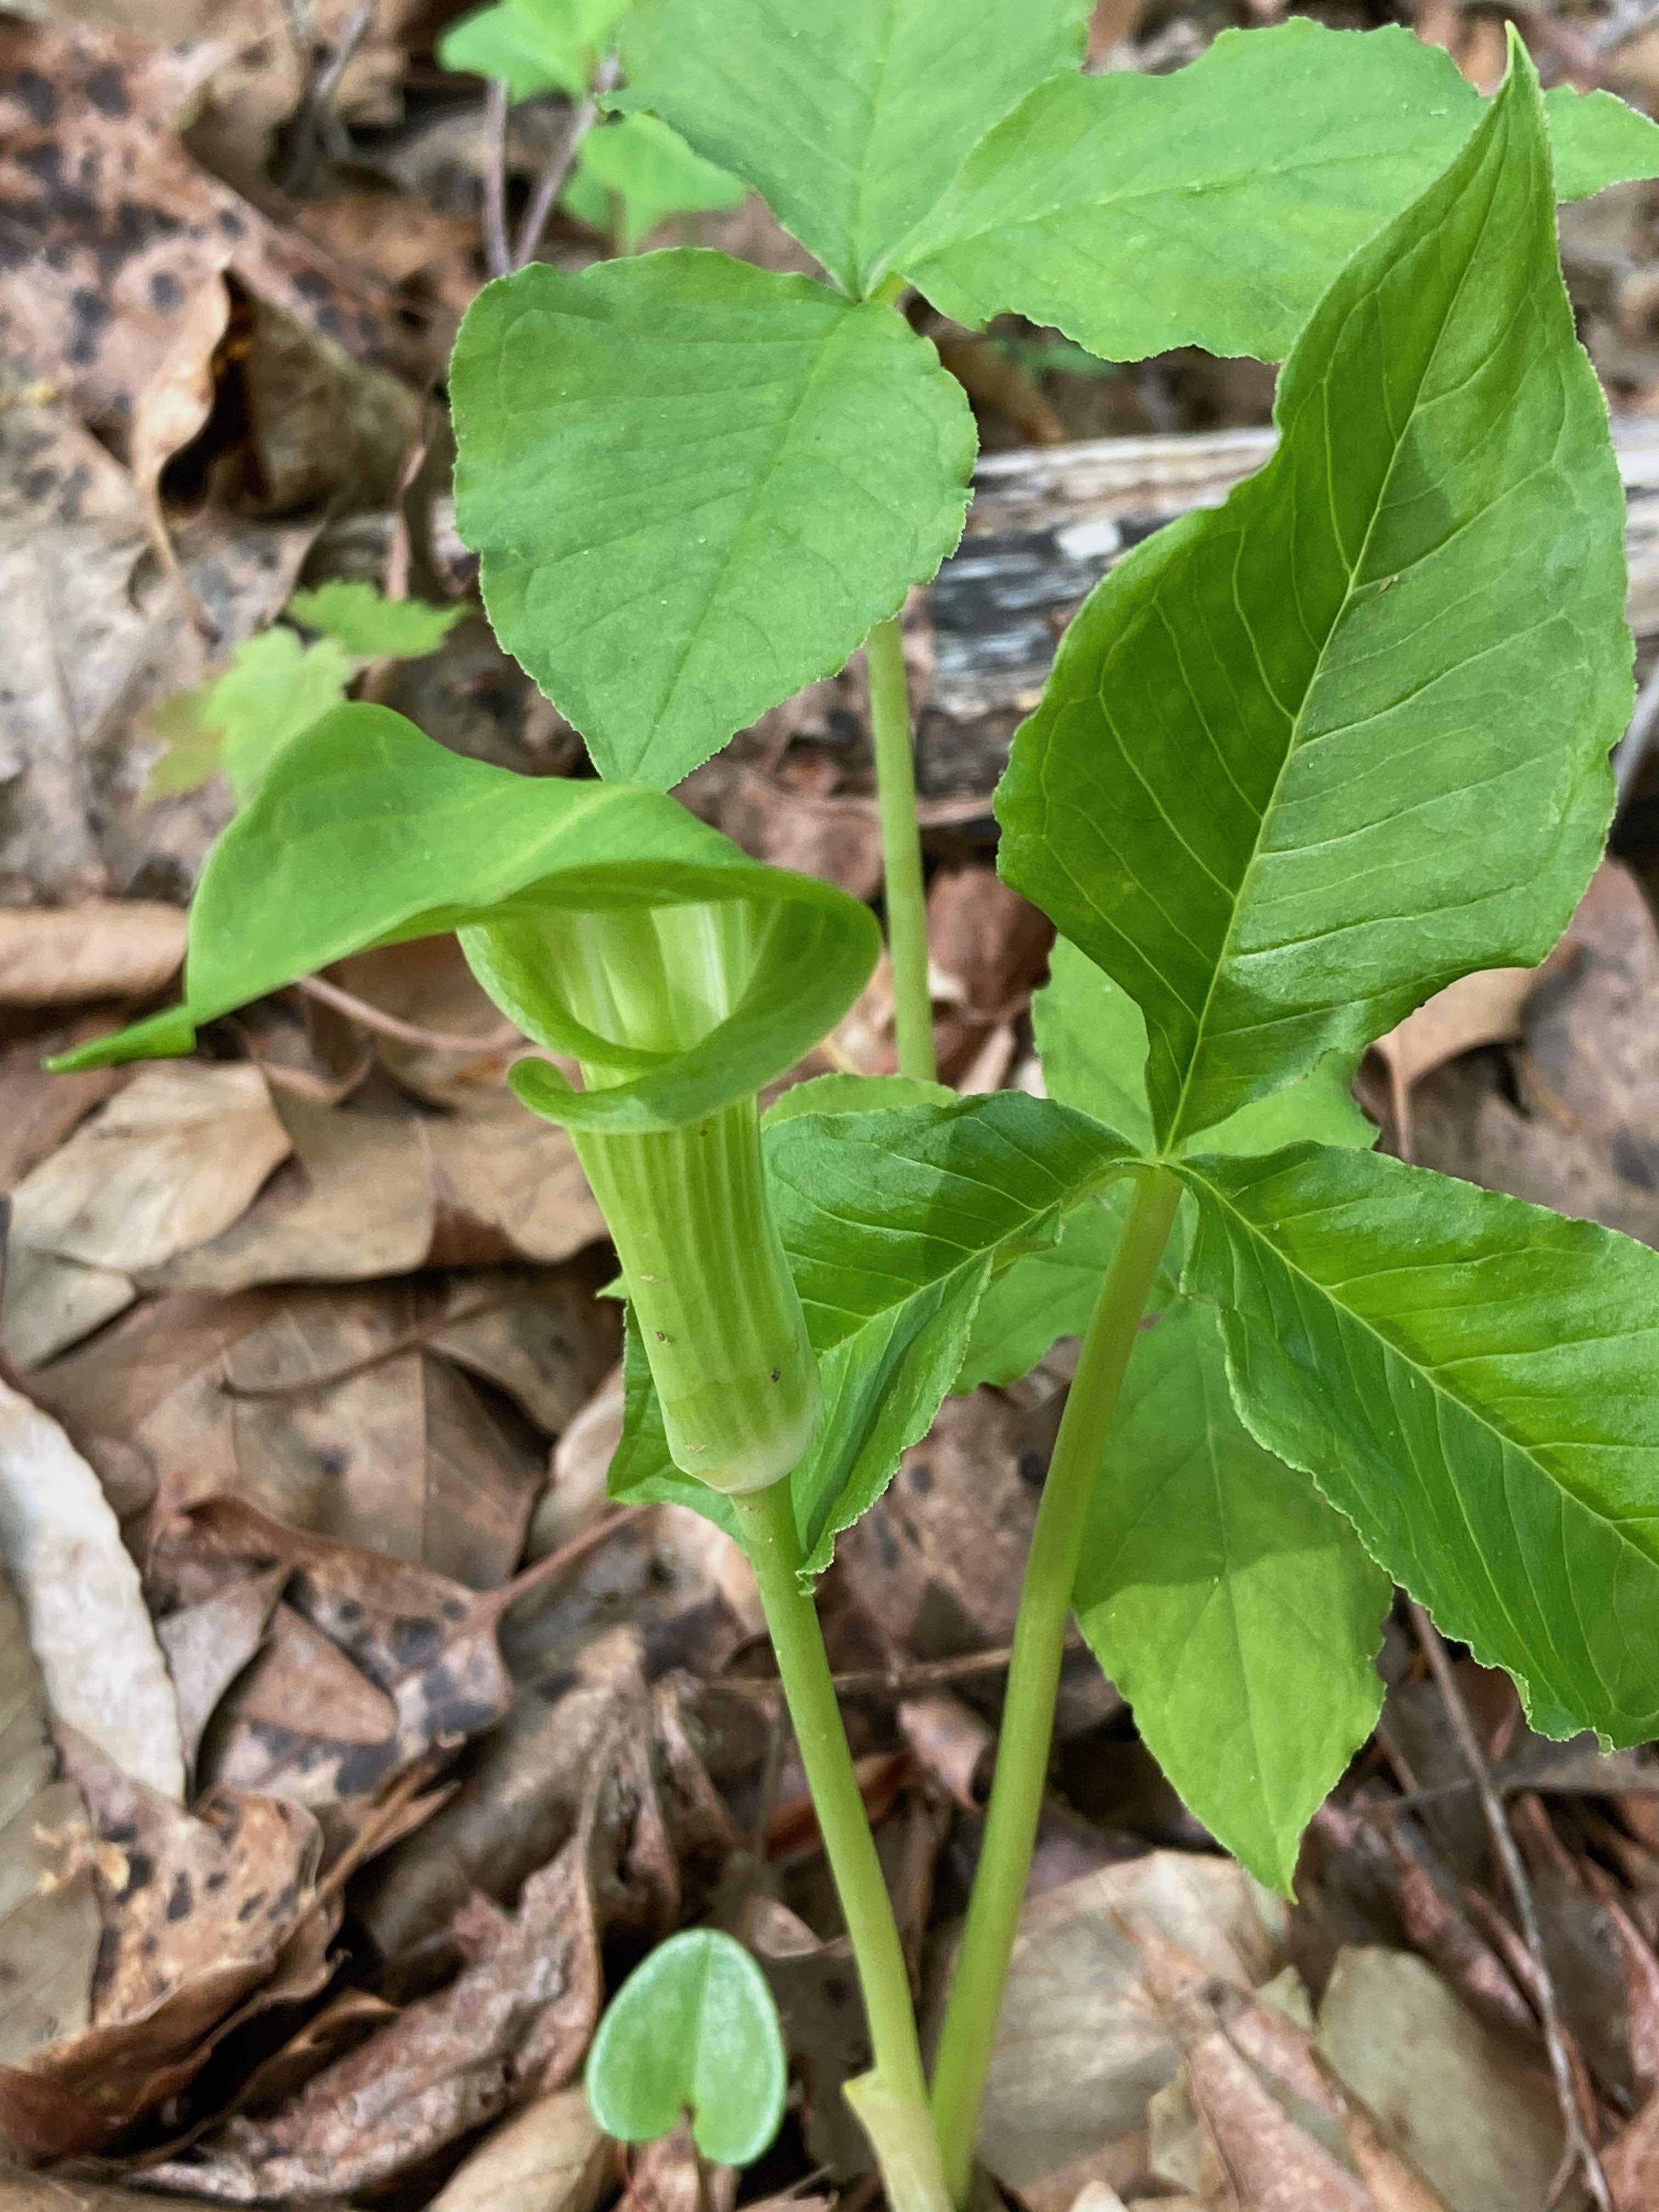 The Scientific Name is Arisaema triphyllum. You will likely hear them called Jack-in-the-Pulpit. This picture shows the Compound leaf of 3 leaflets. (Trilliums also have trifoliate compound leaves but the leaflets are evenly spaced around the petiole while in <em>Arisaema triphyllum</em>, they are not.) of Arisaema triphyllum